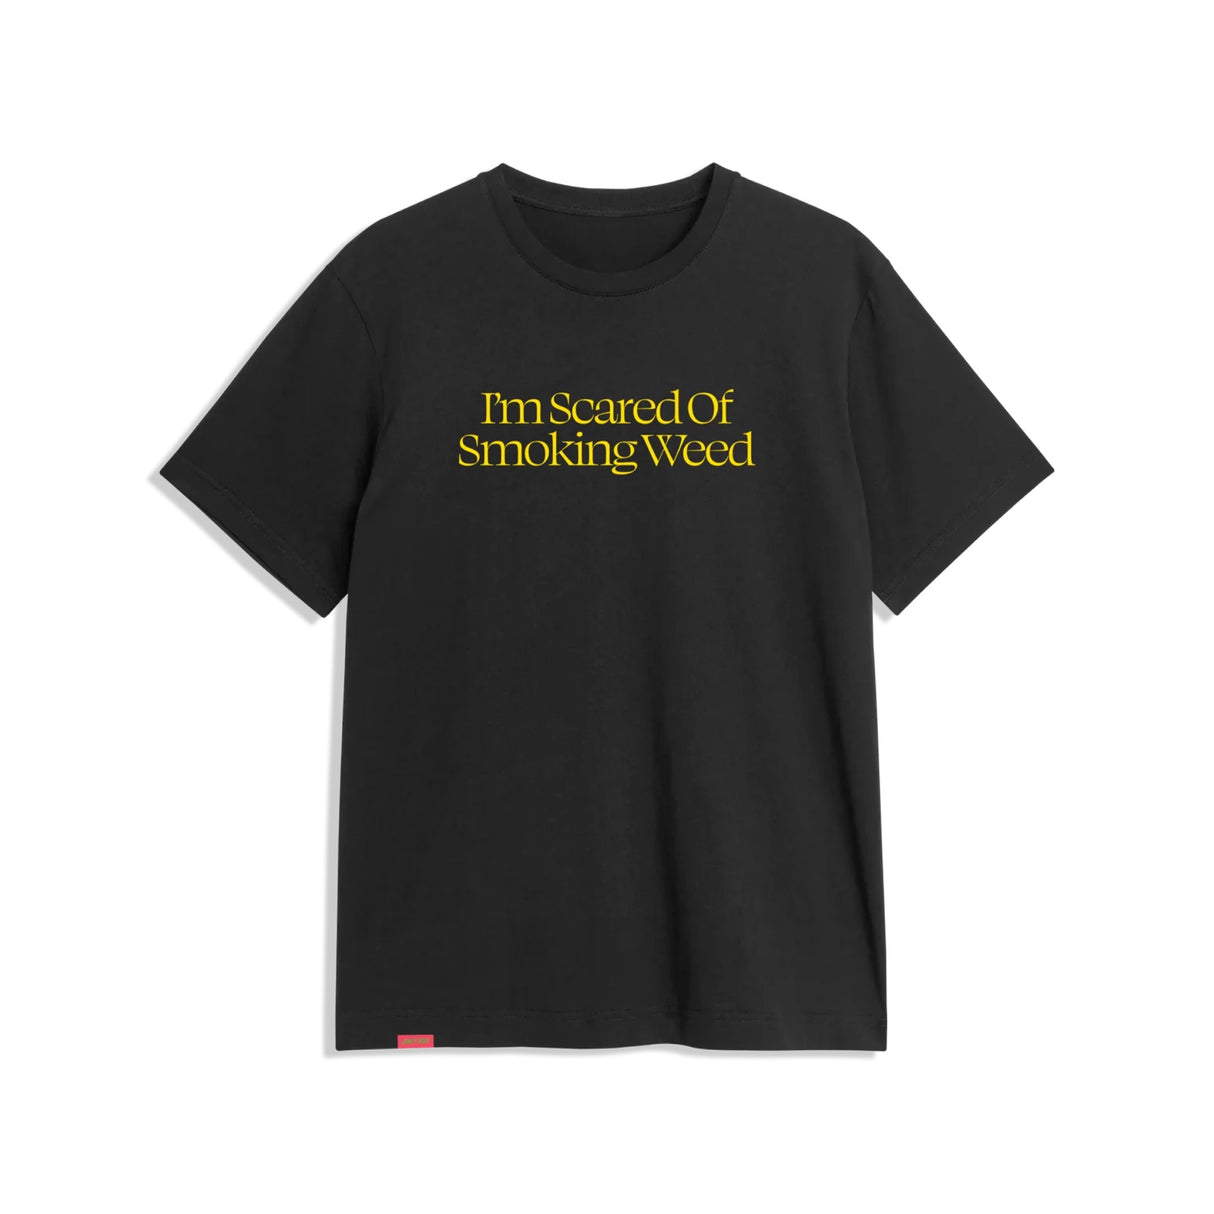 Jacuzzi Scared Weed Black S/s Shirt